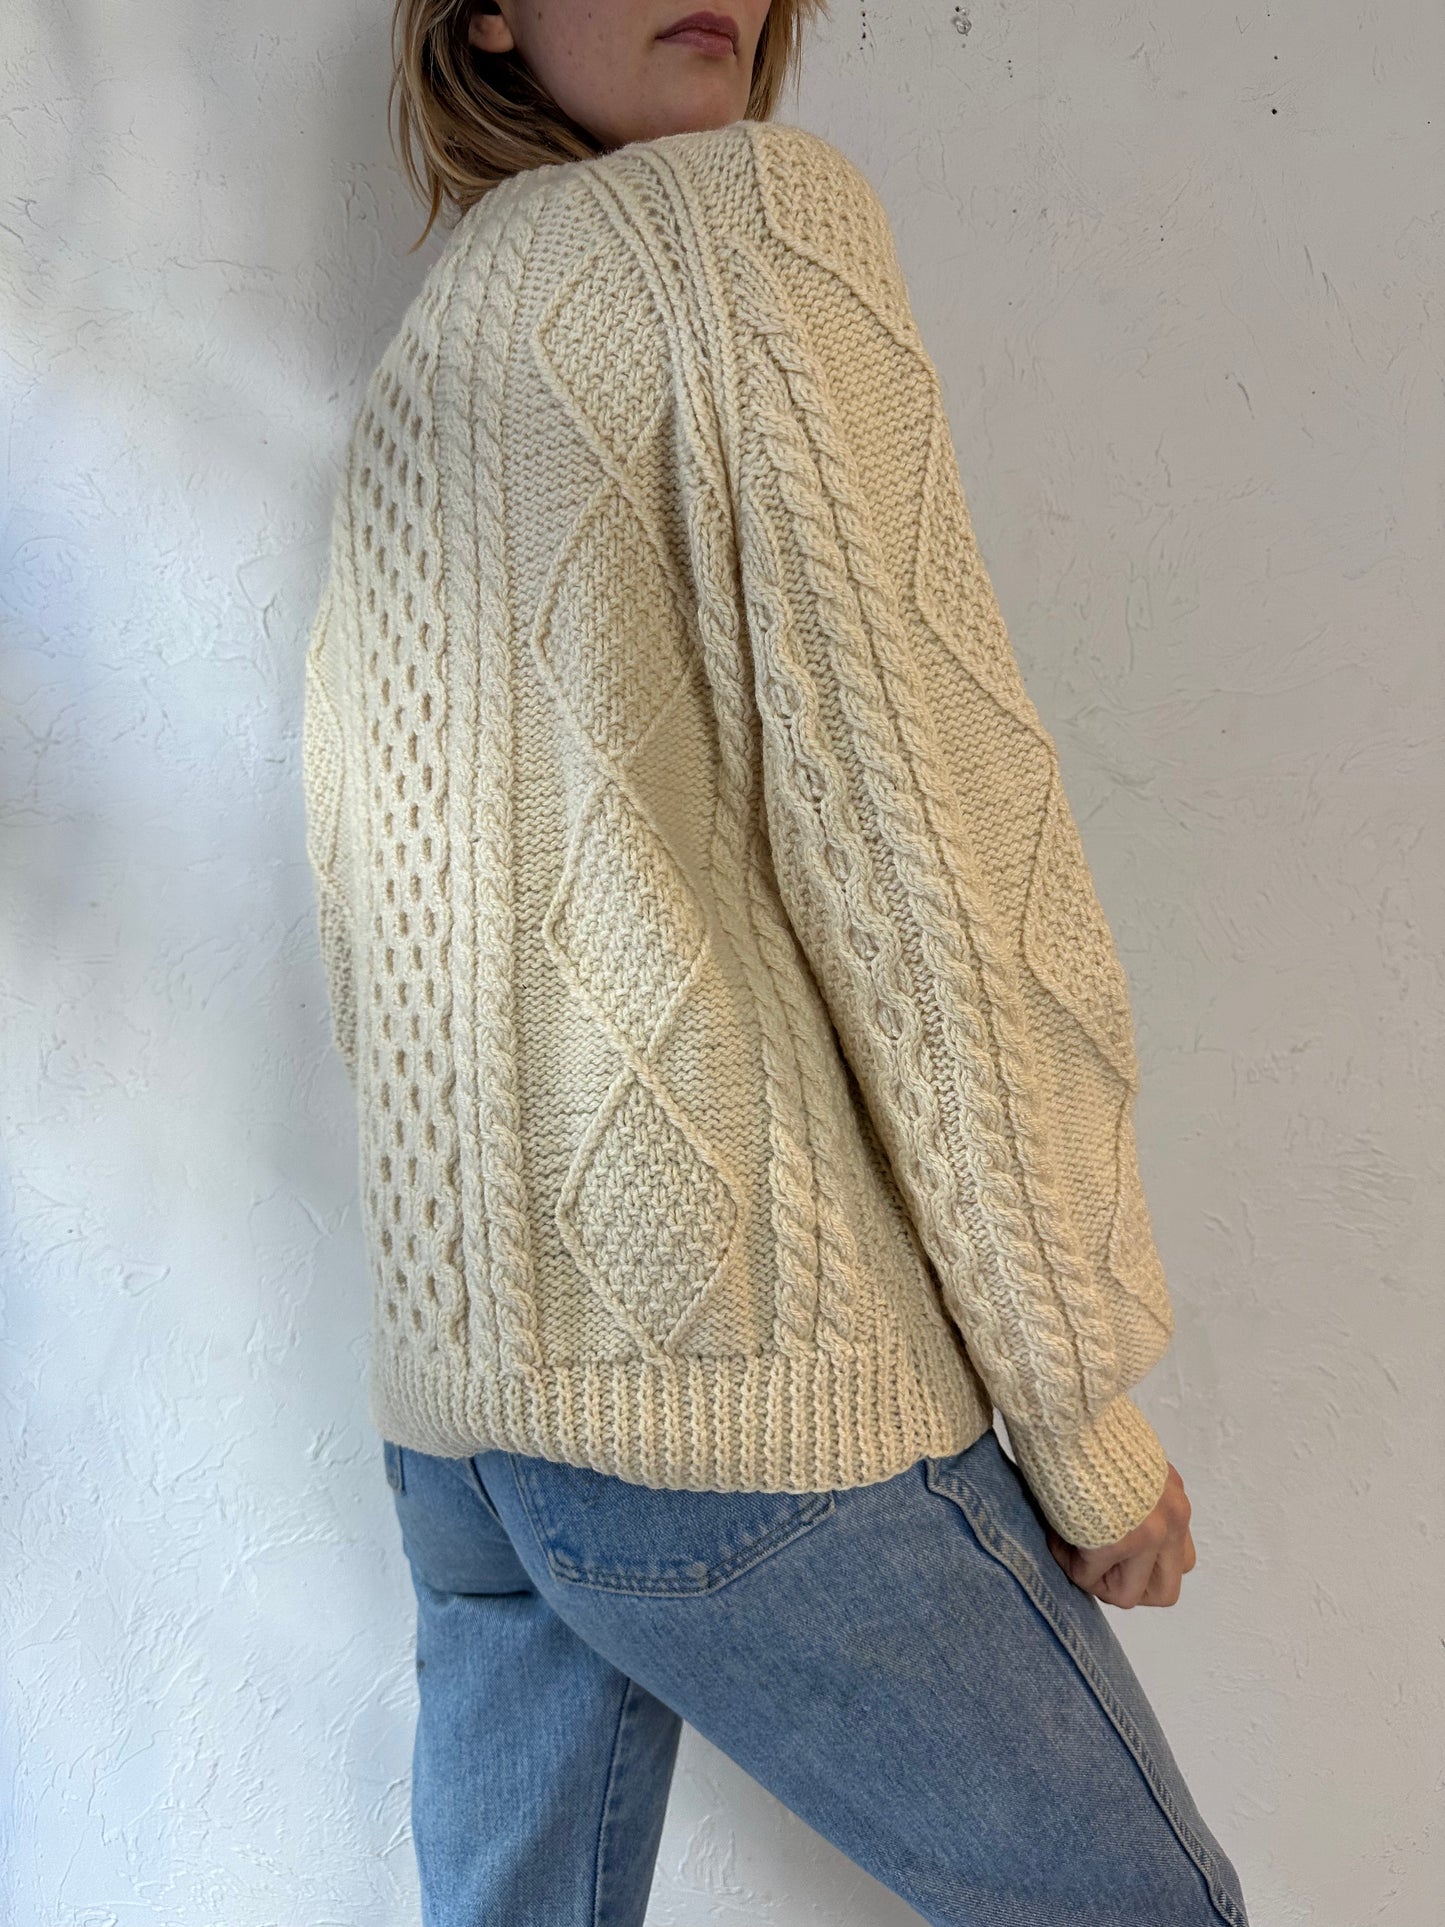 Vintage Hand Knit Cream Cable Knit Fishermans Sweater / Small